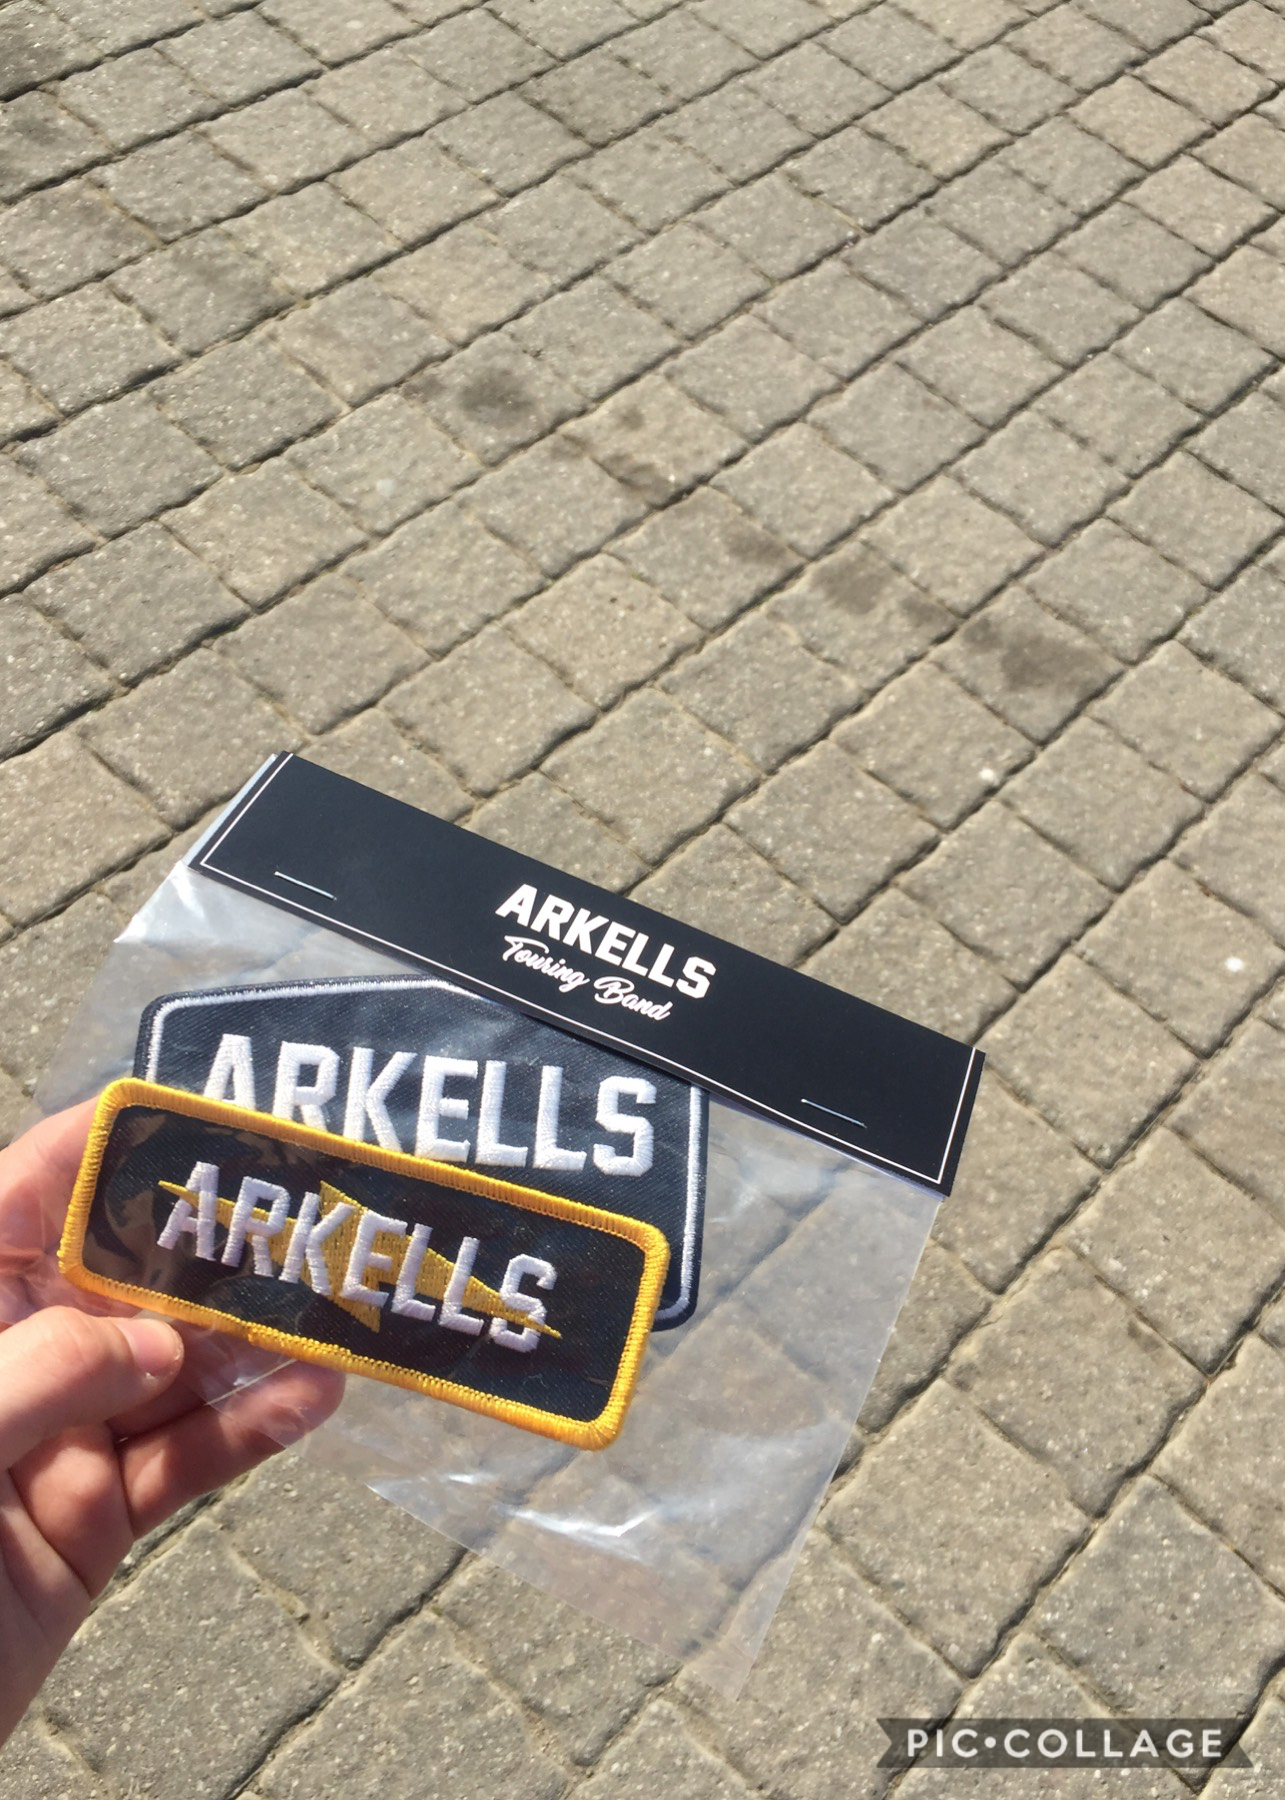 “There’s nothing wrong with some hand me downs” - arkells <3